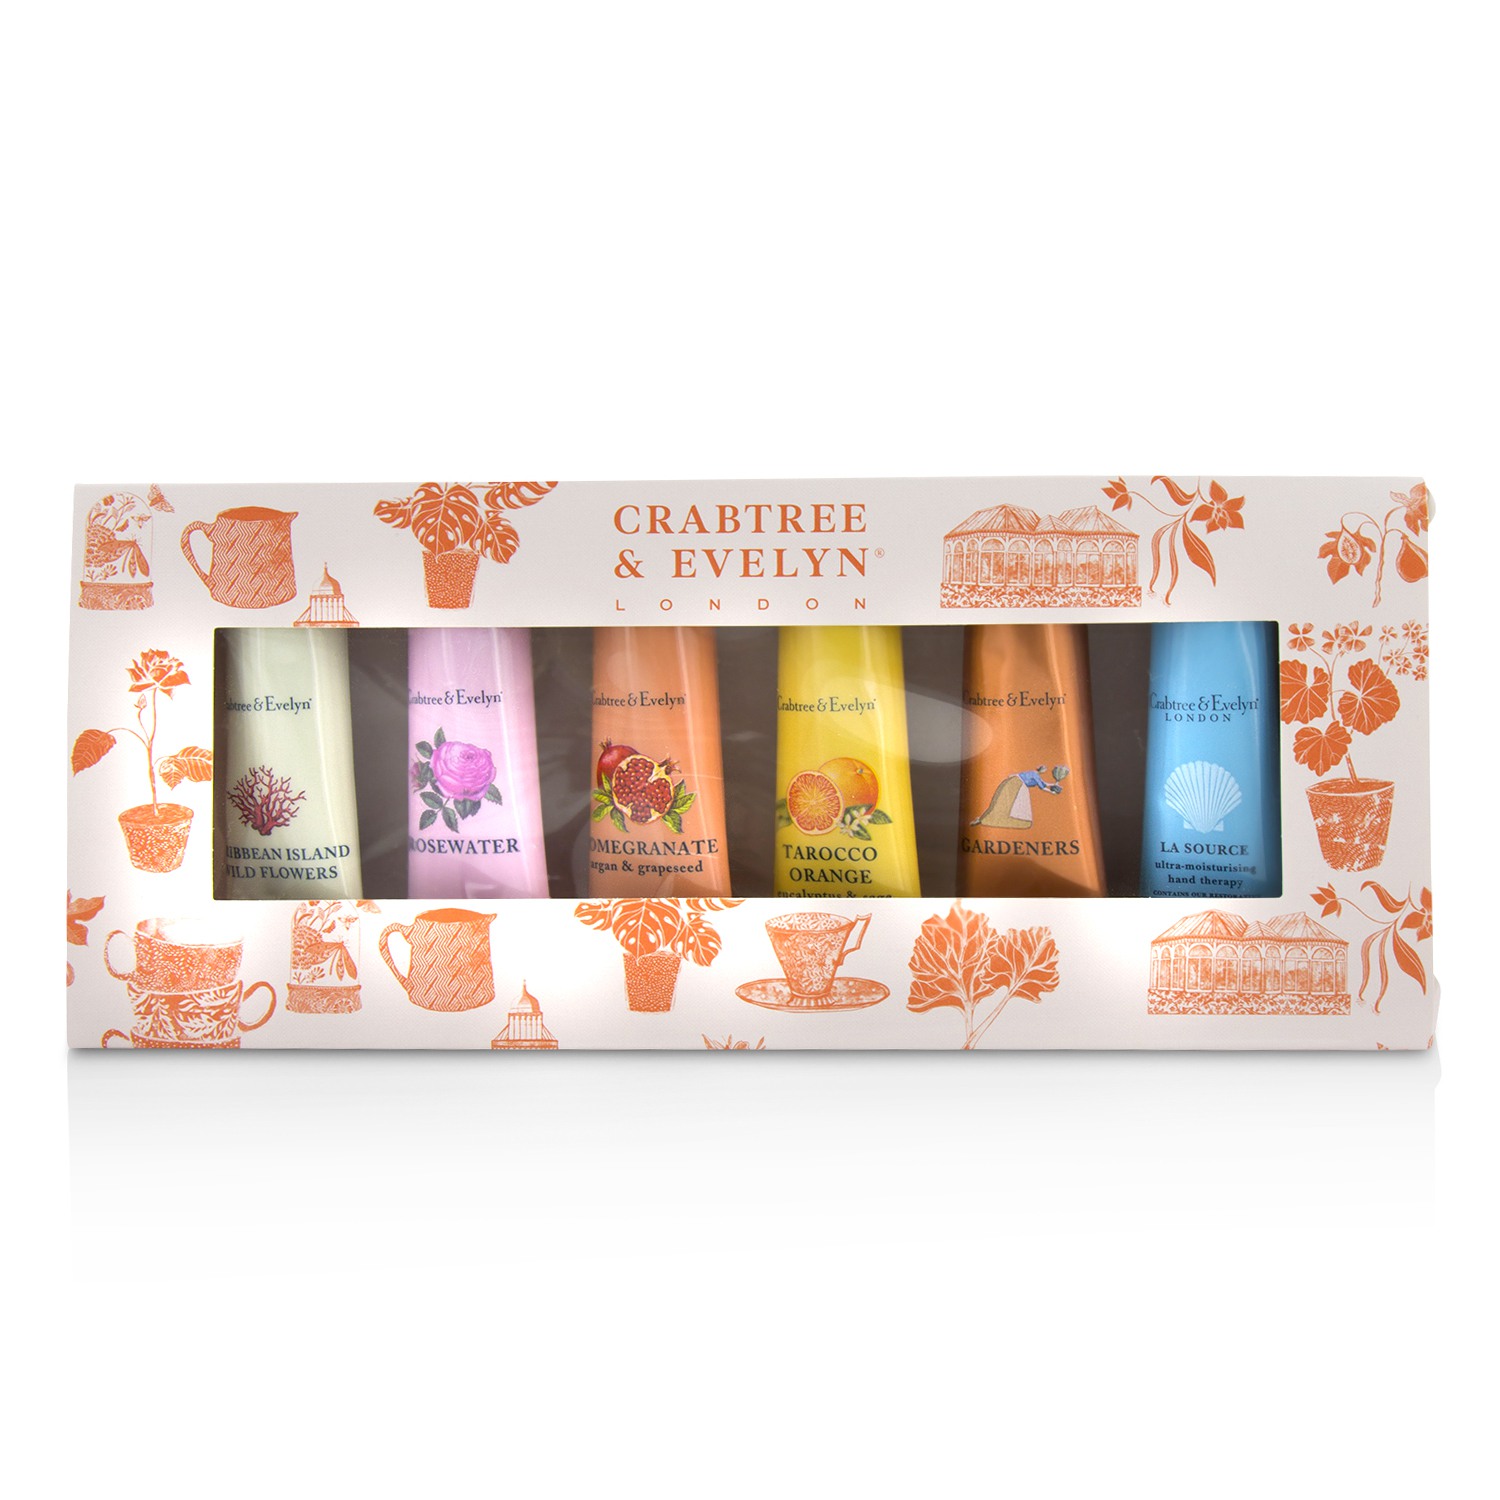 Bestsellers Hand Therapy Six-Piece Set Crabtree & Evelyn Image